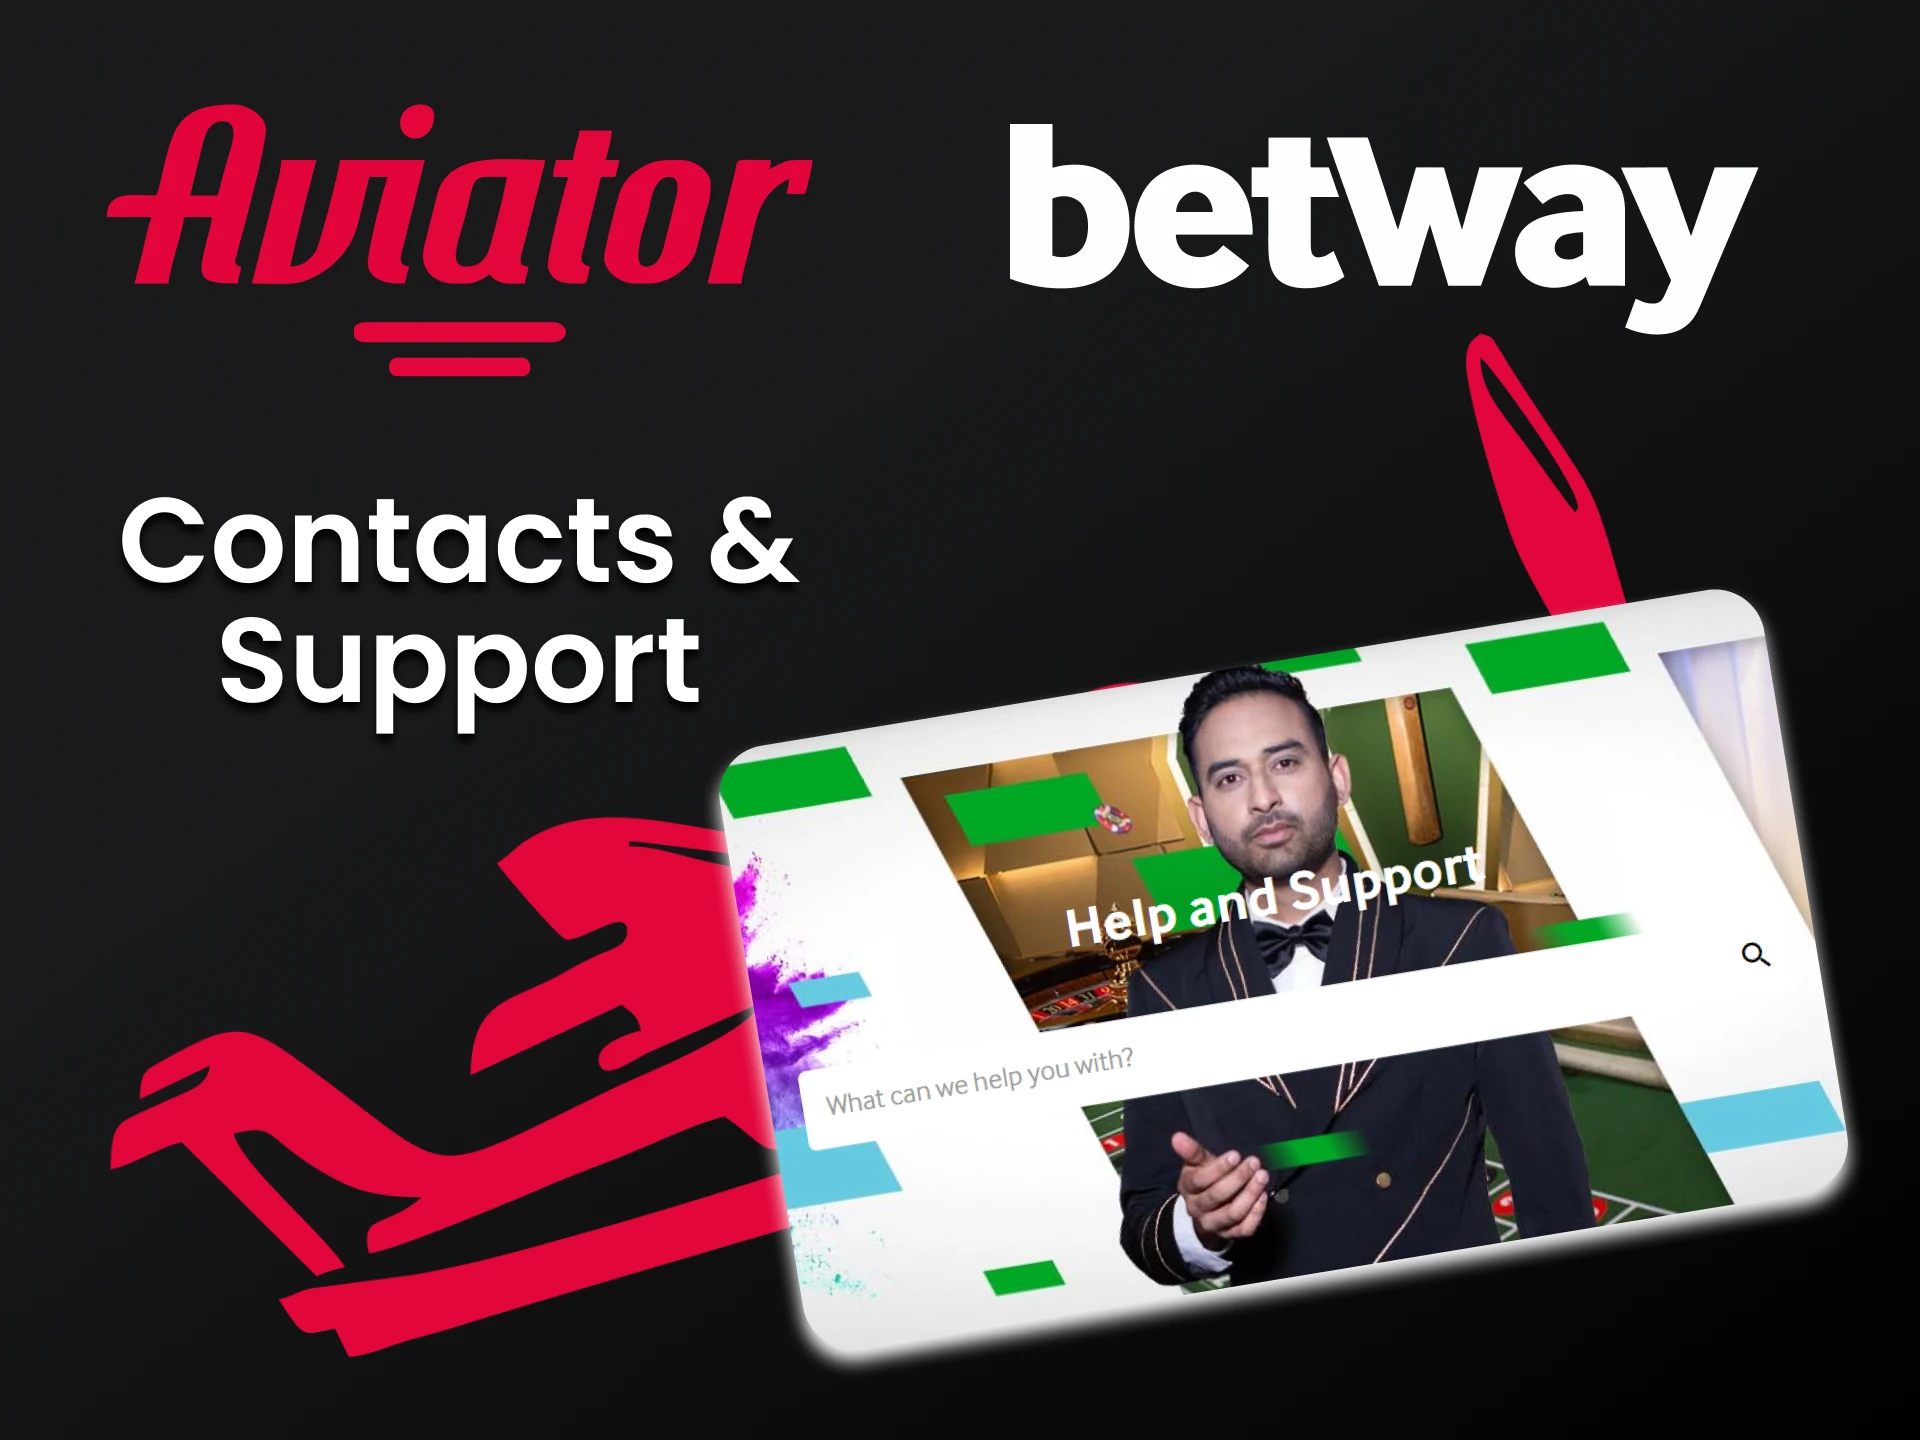 Betway will always help you with any questions you may have.